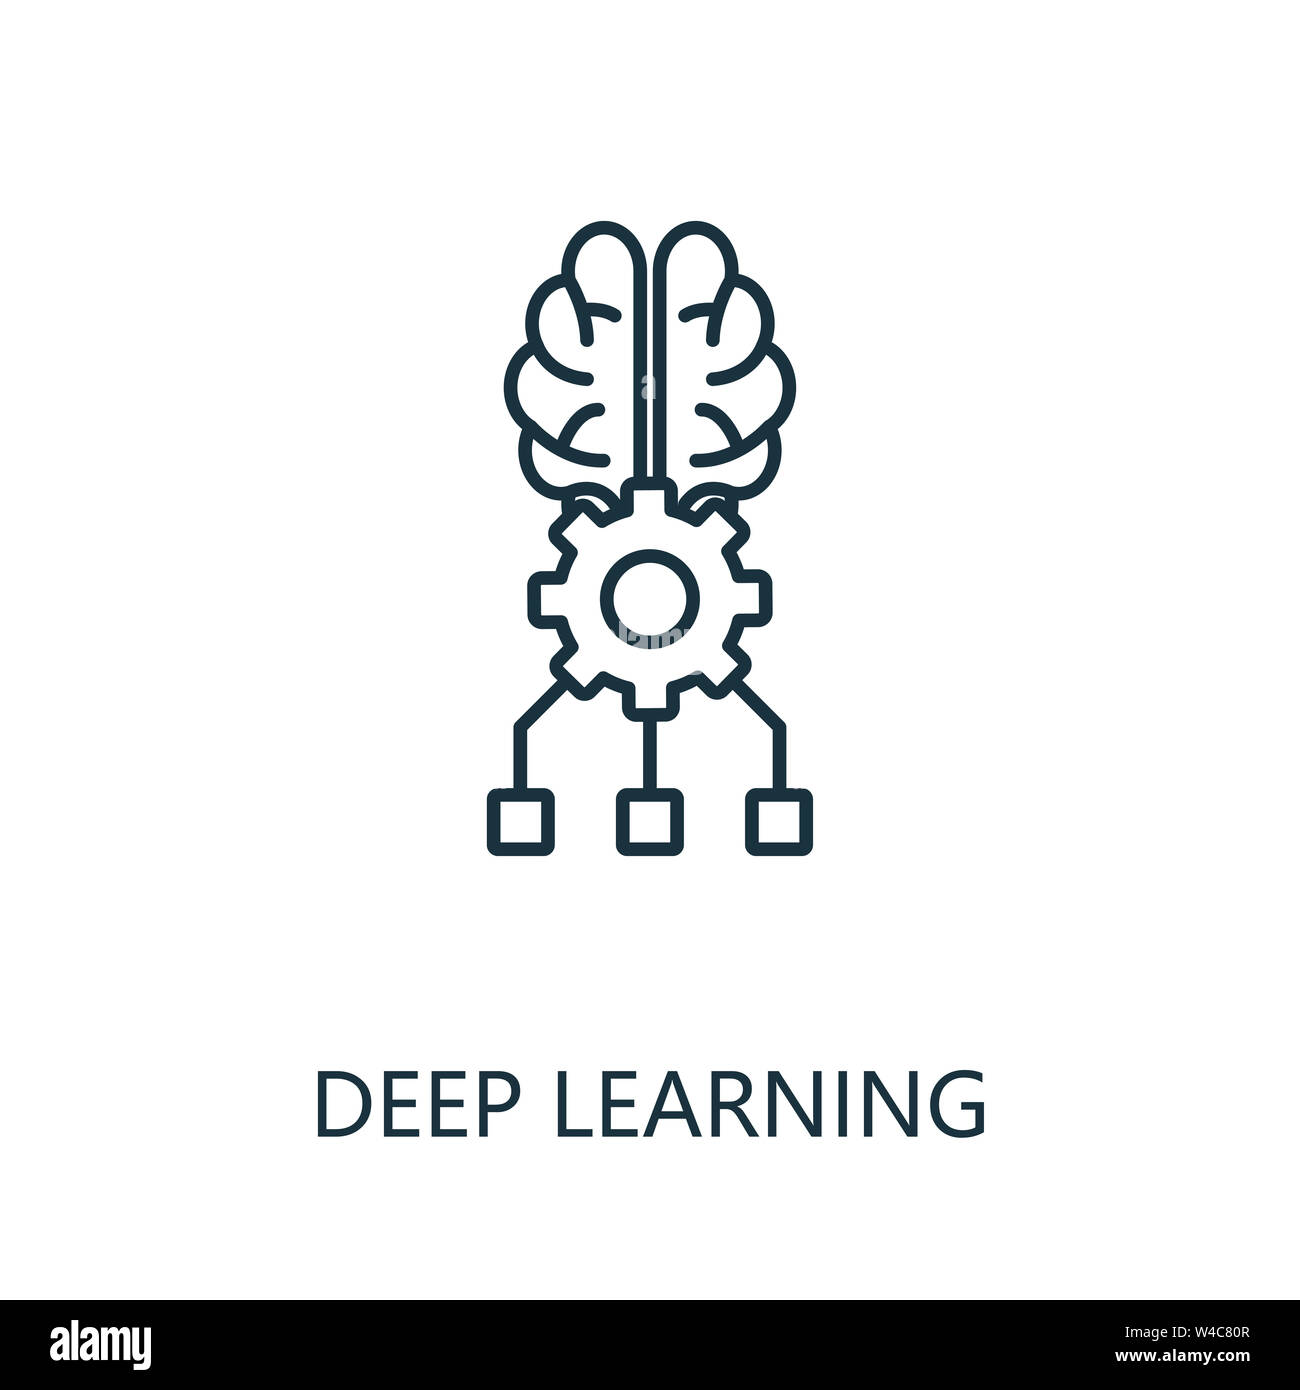 Make Different Deep Learning Logo For Your Company, 55% OFF